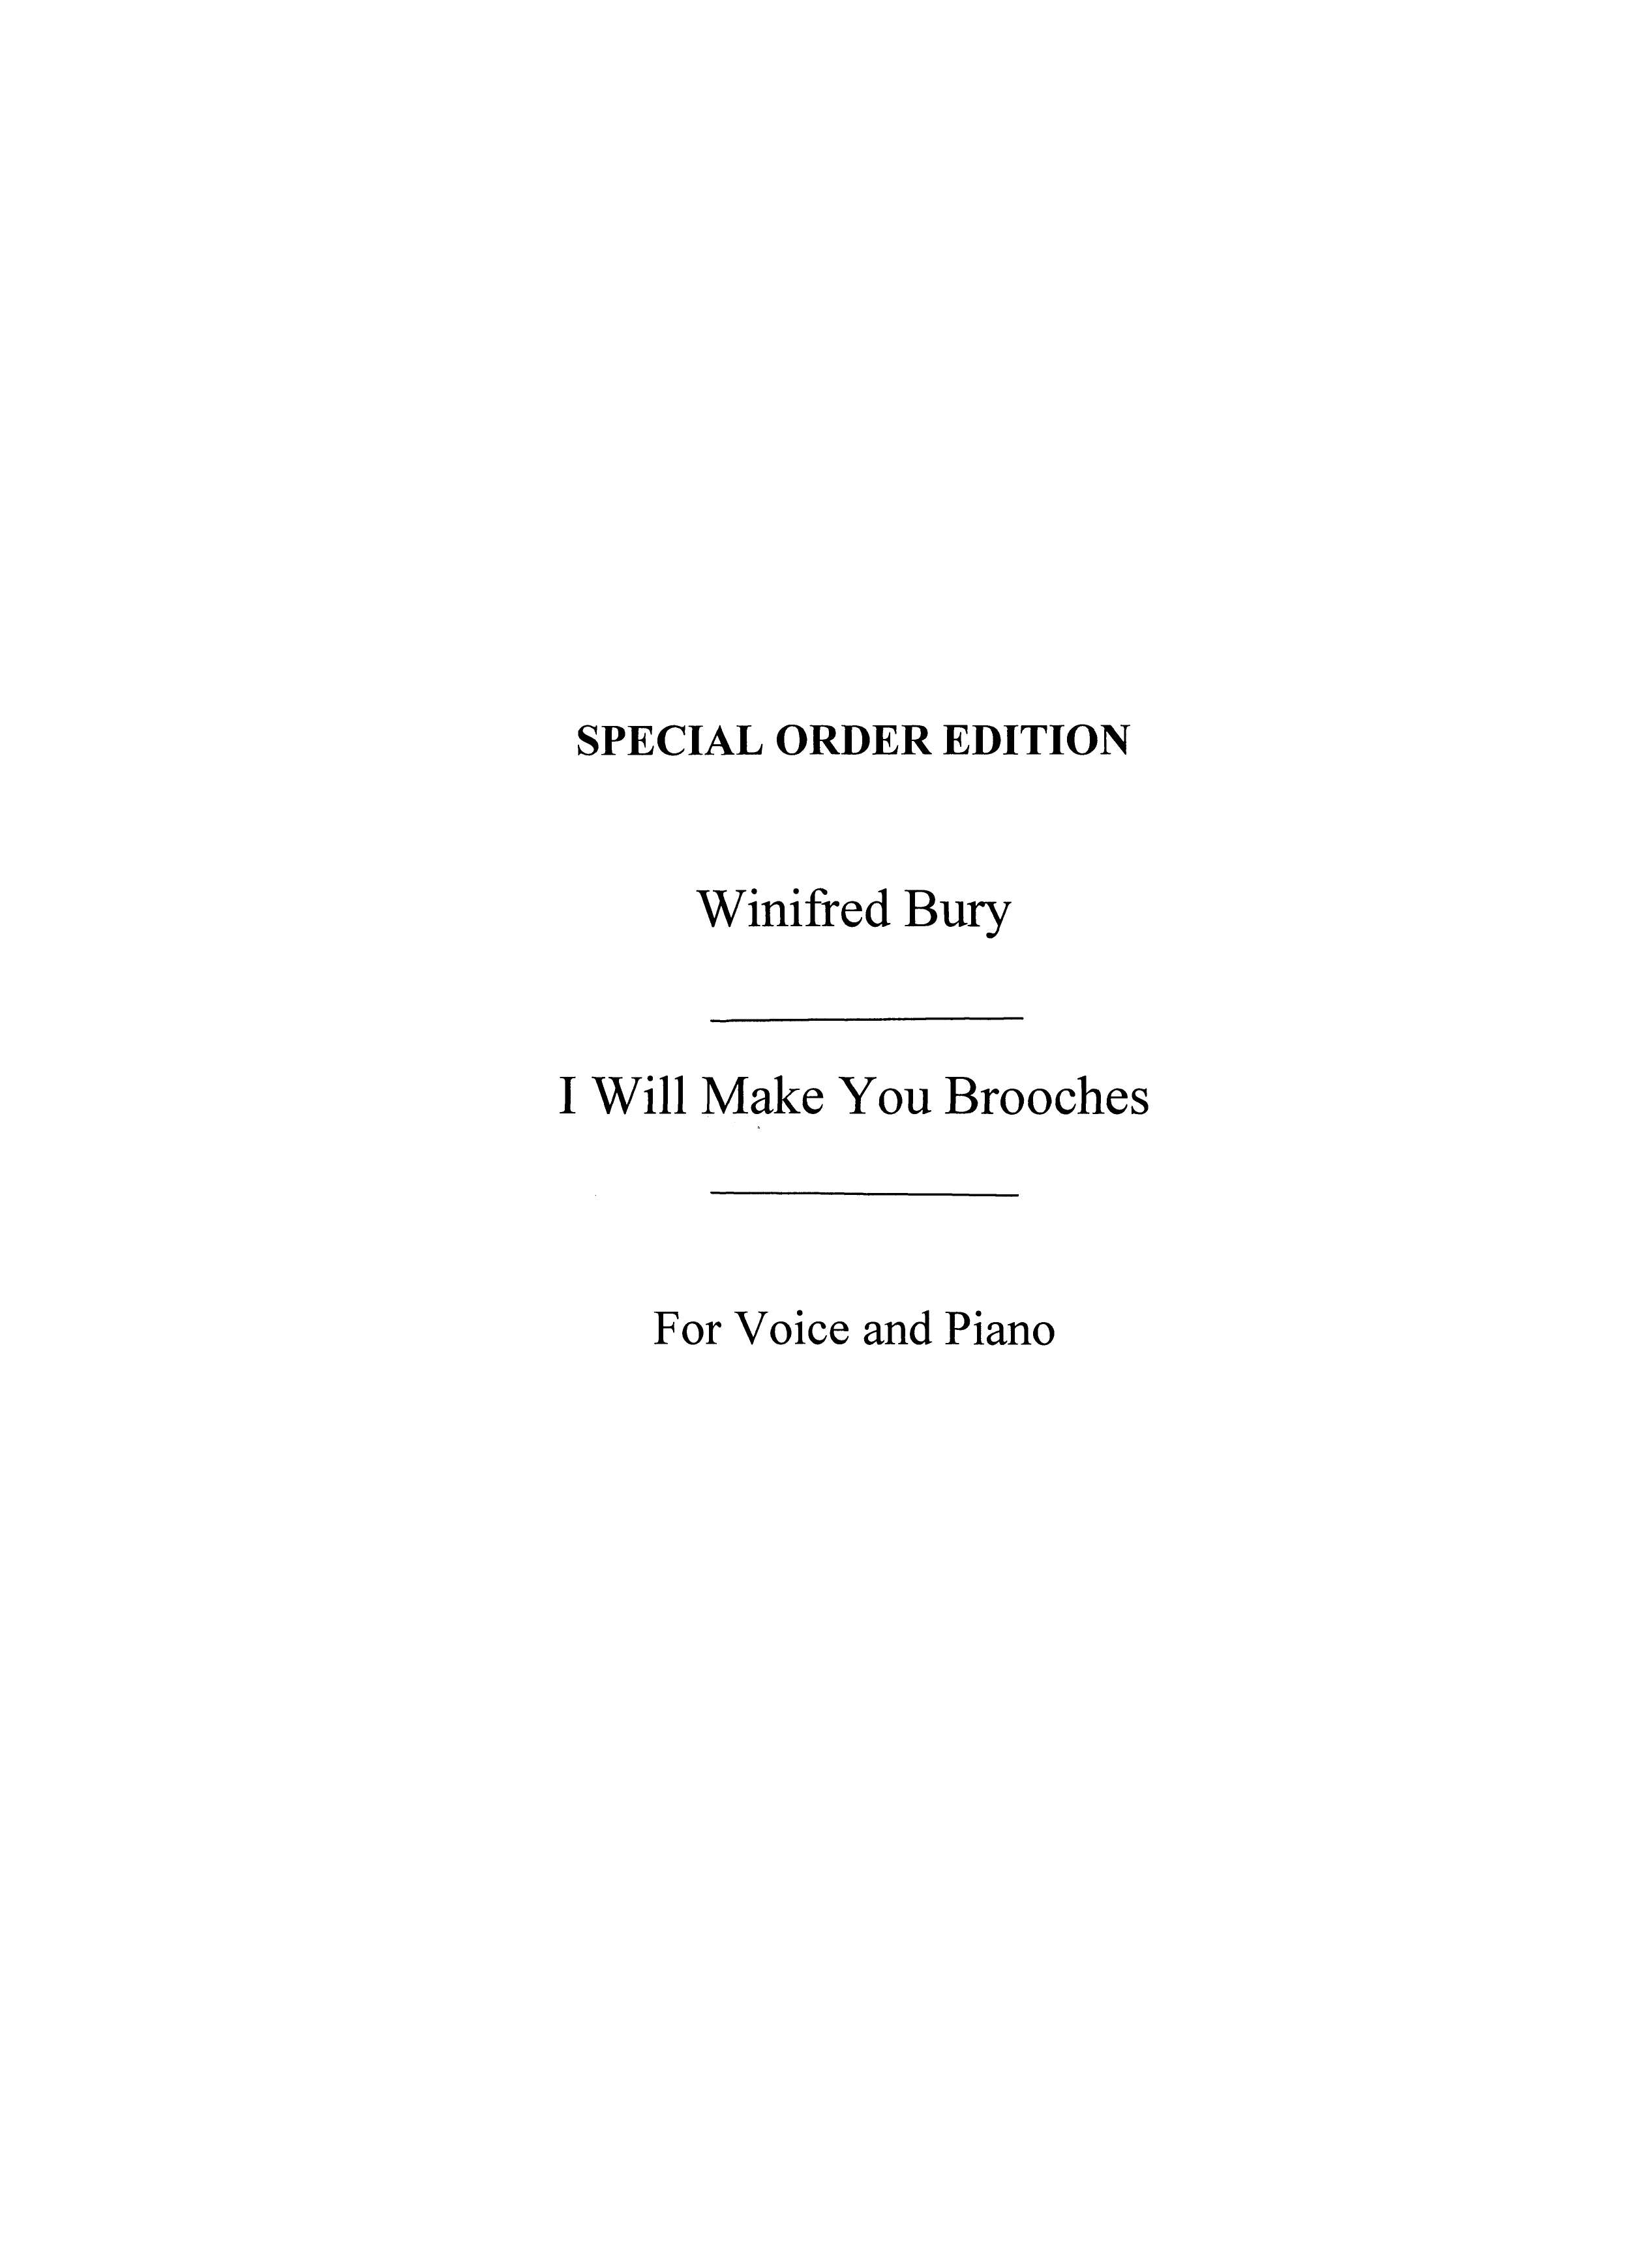 Winifred Bury: I Will Make You Brooches: Voice: Vocal Work